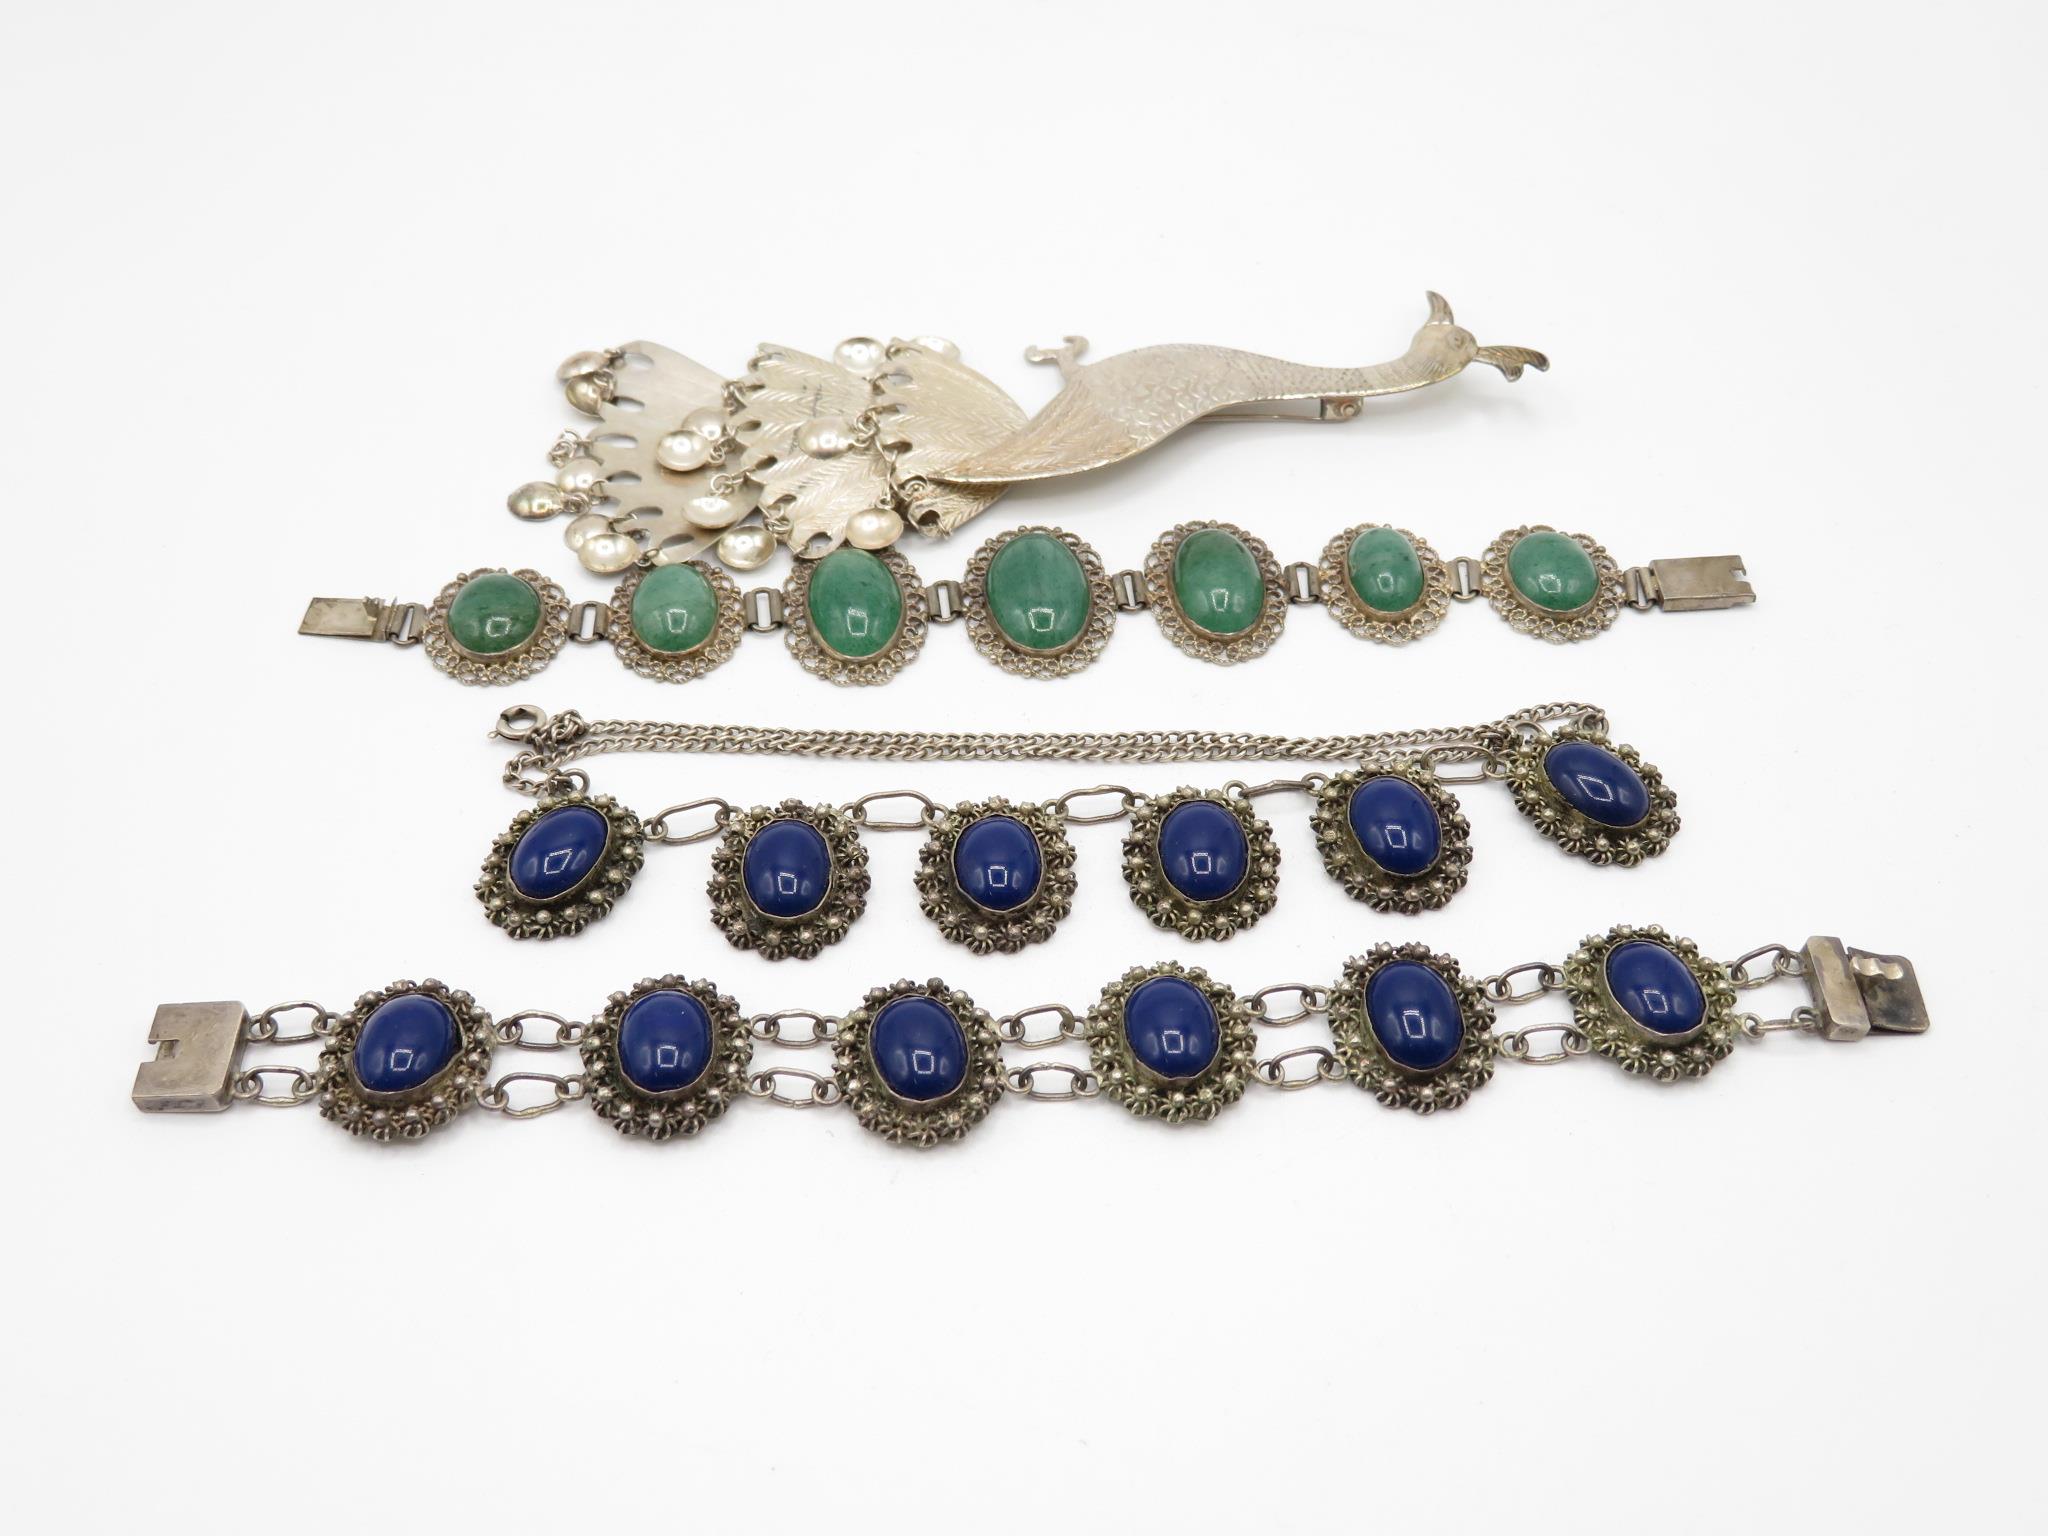 A Silver Filigree Gemstone Set Necklace And Bracelet, And A Silver Peacock Brooch (89g)